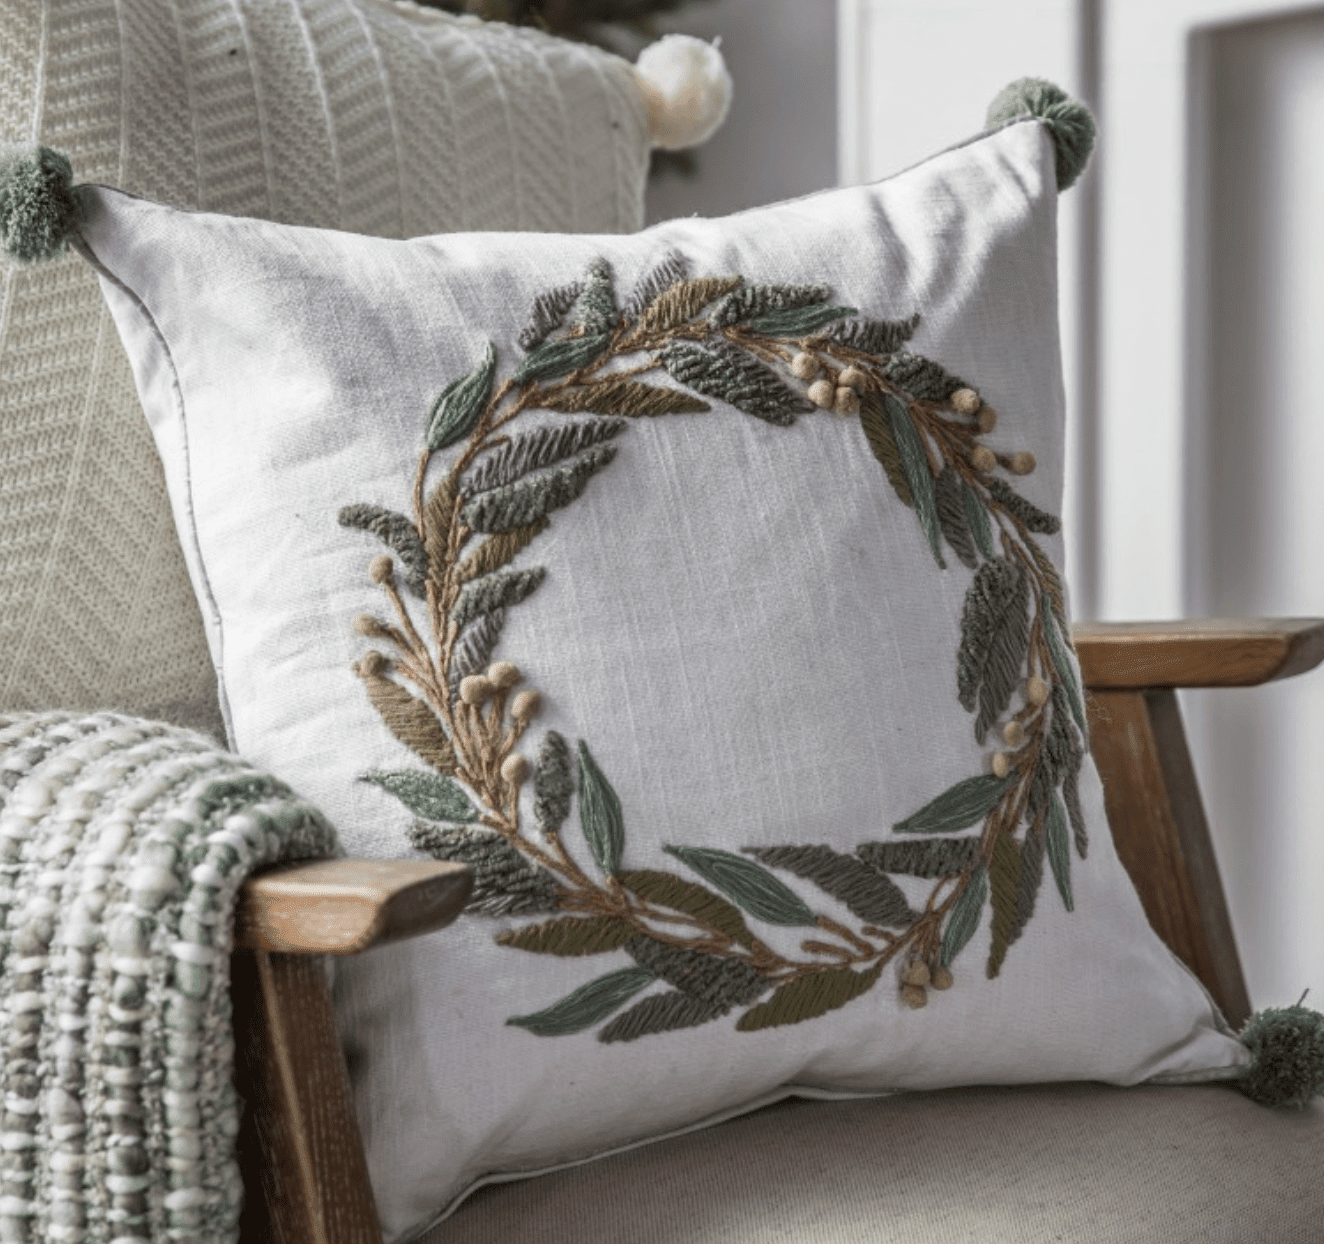 Embroidered Wreath Pom Pom Cushion - Outlet - Save 20%